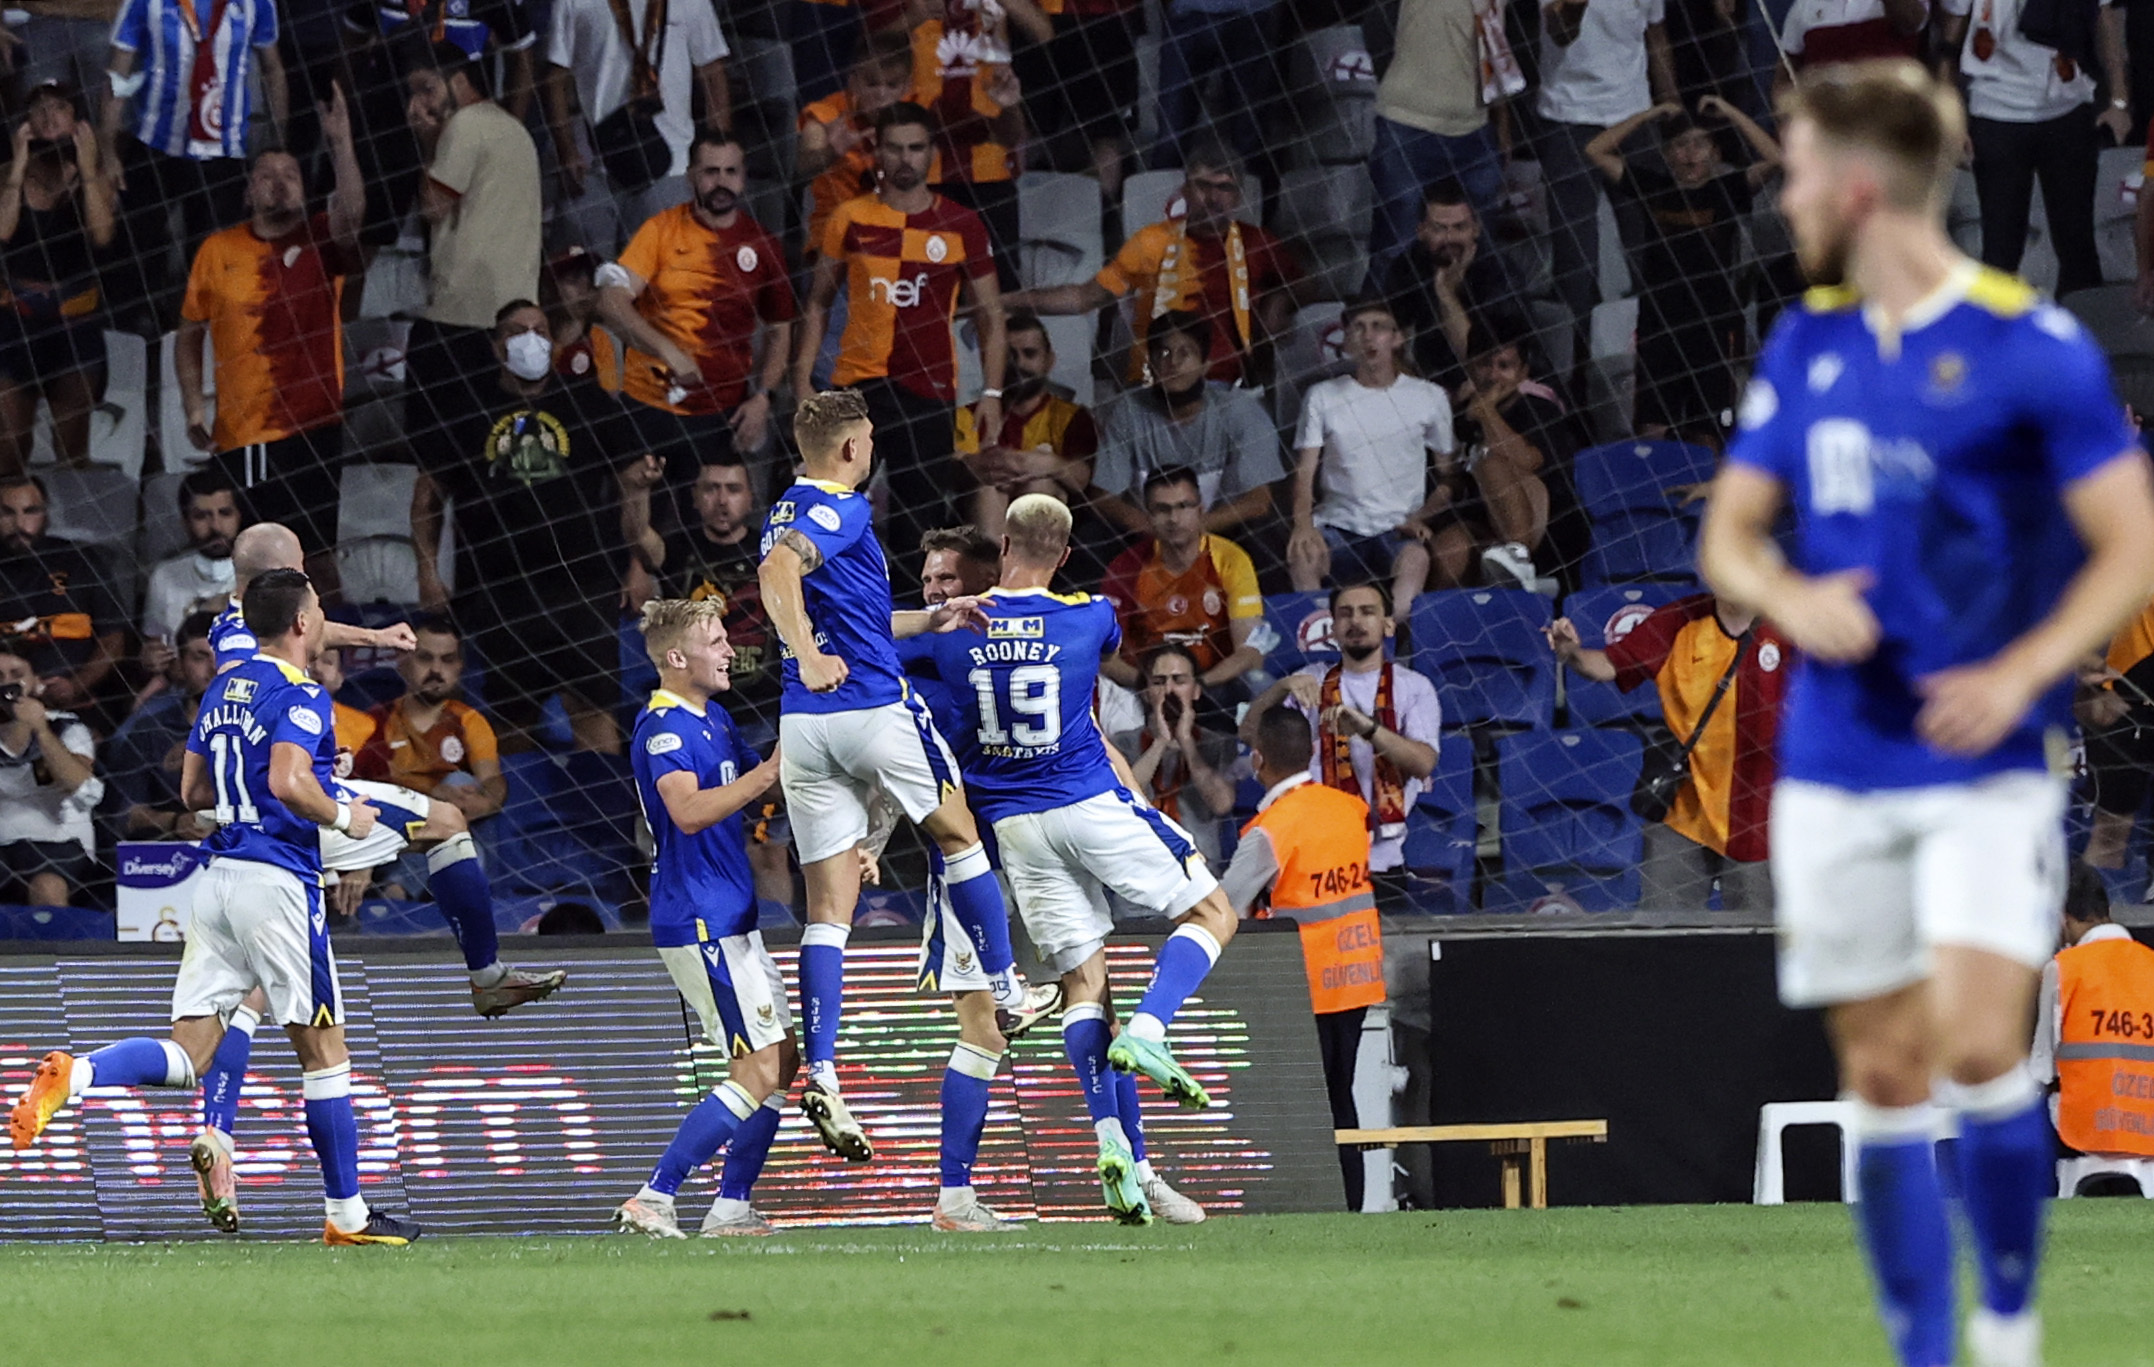 Galatasaray 1 St Johnstone 1: Callum Davidson's men continue to defy the odds with stunning display in Turkey